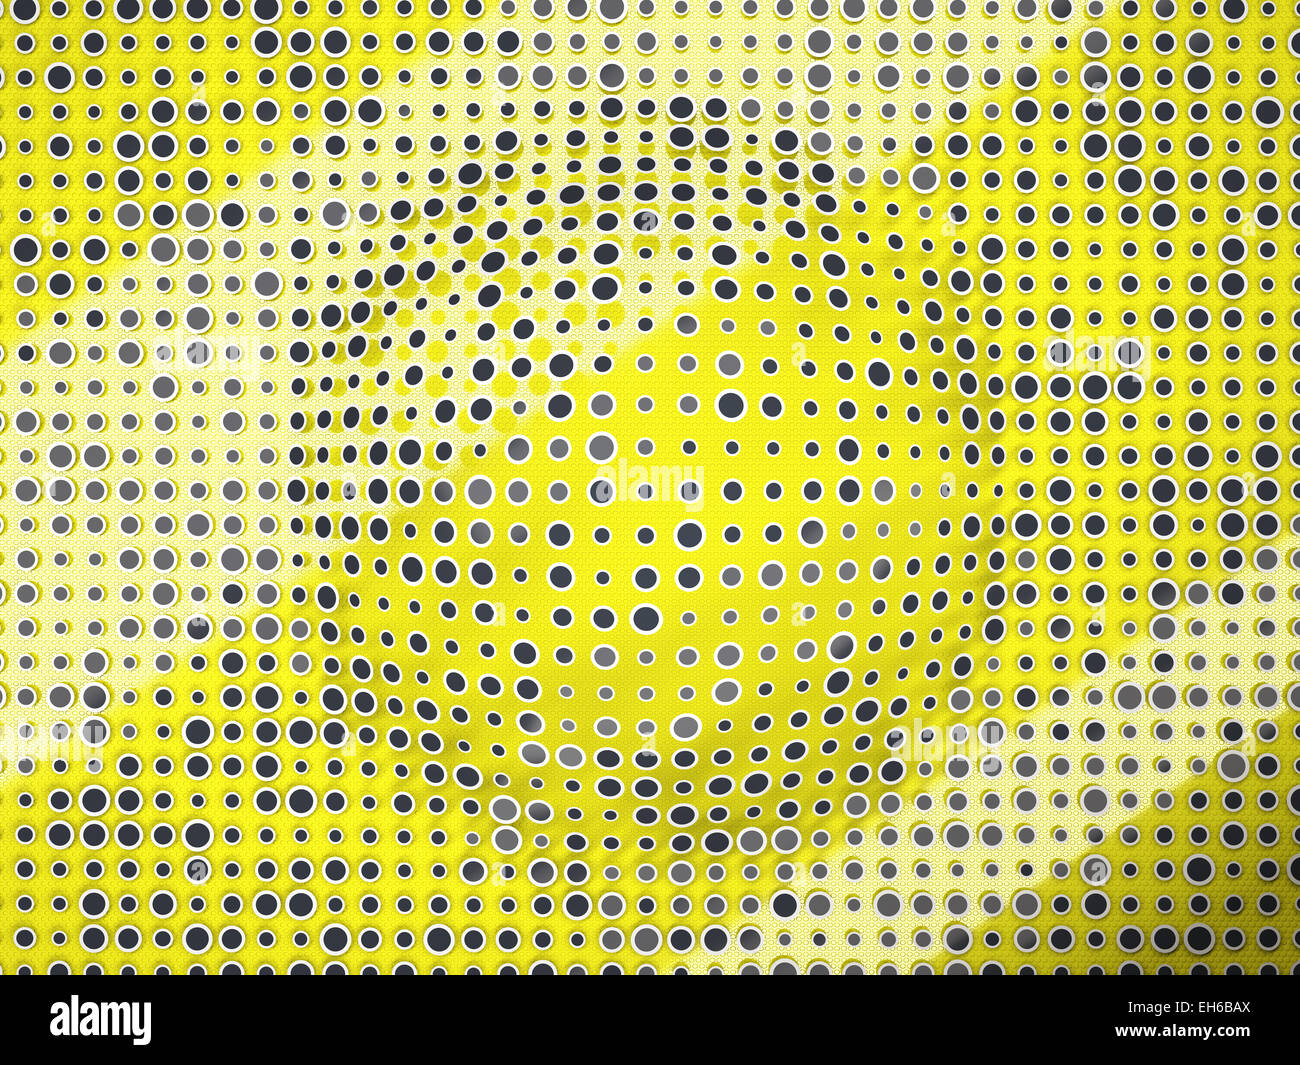 Polka dots pattern with black circles and bump on yellow. Creative background Stock Photo